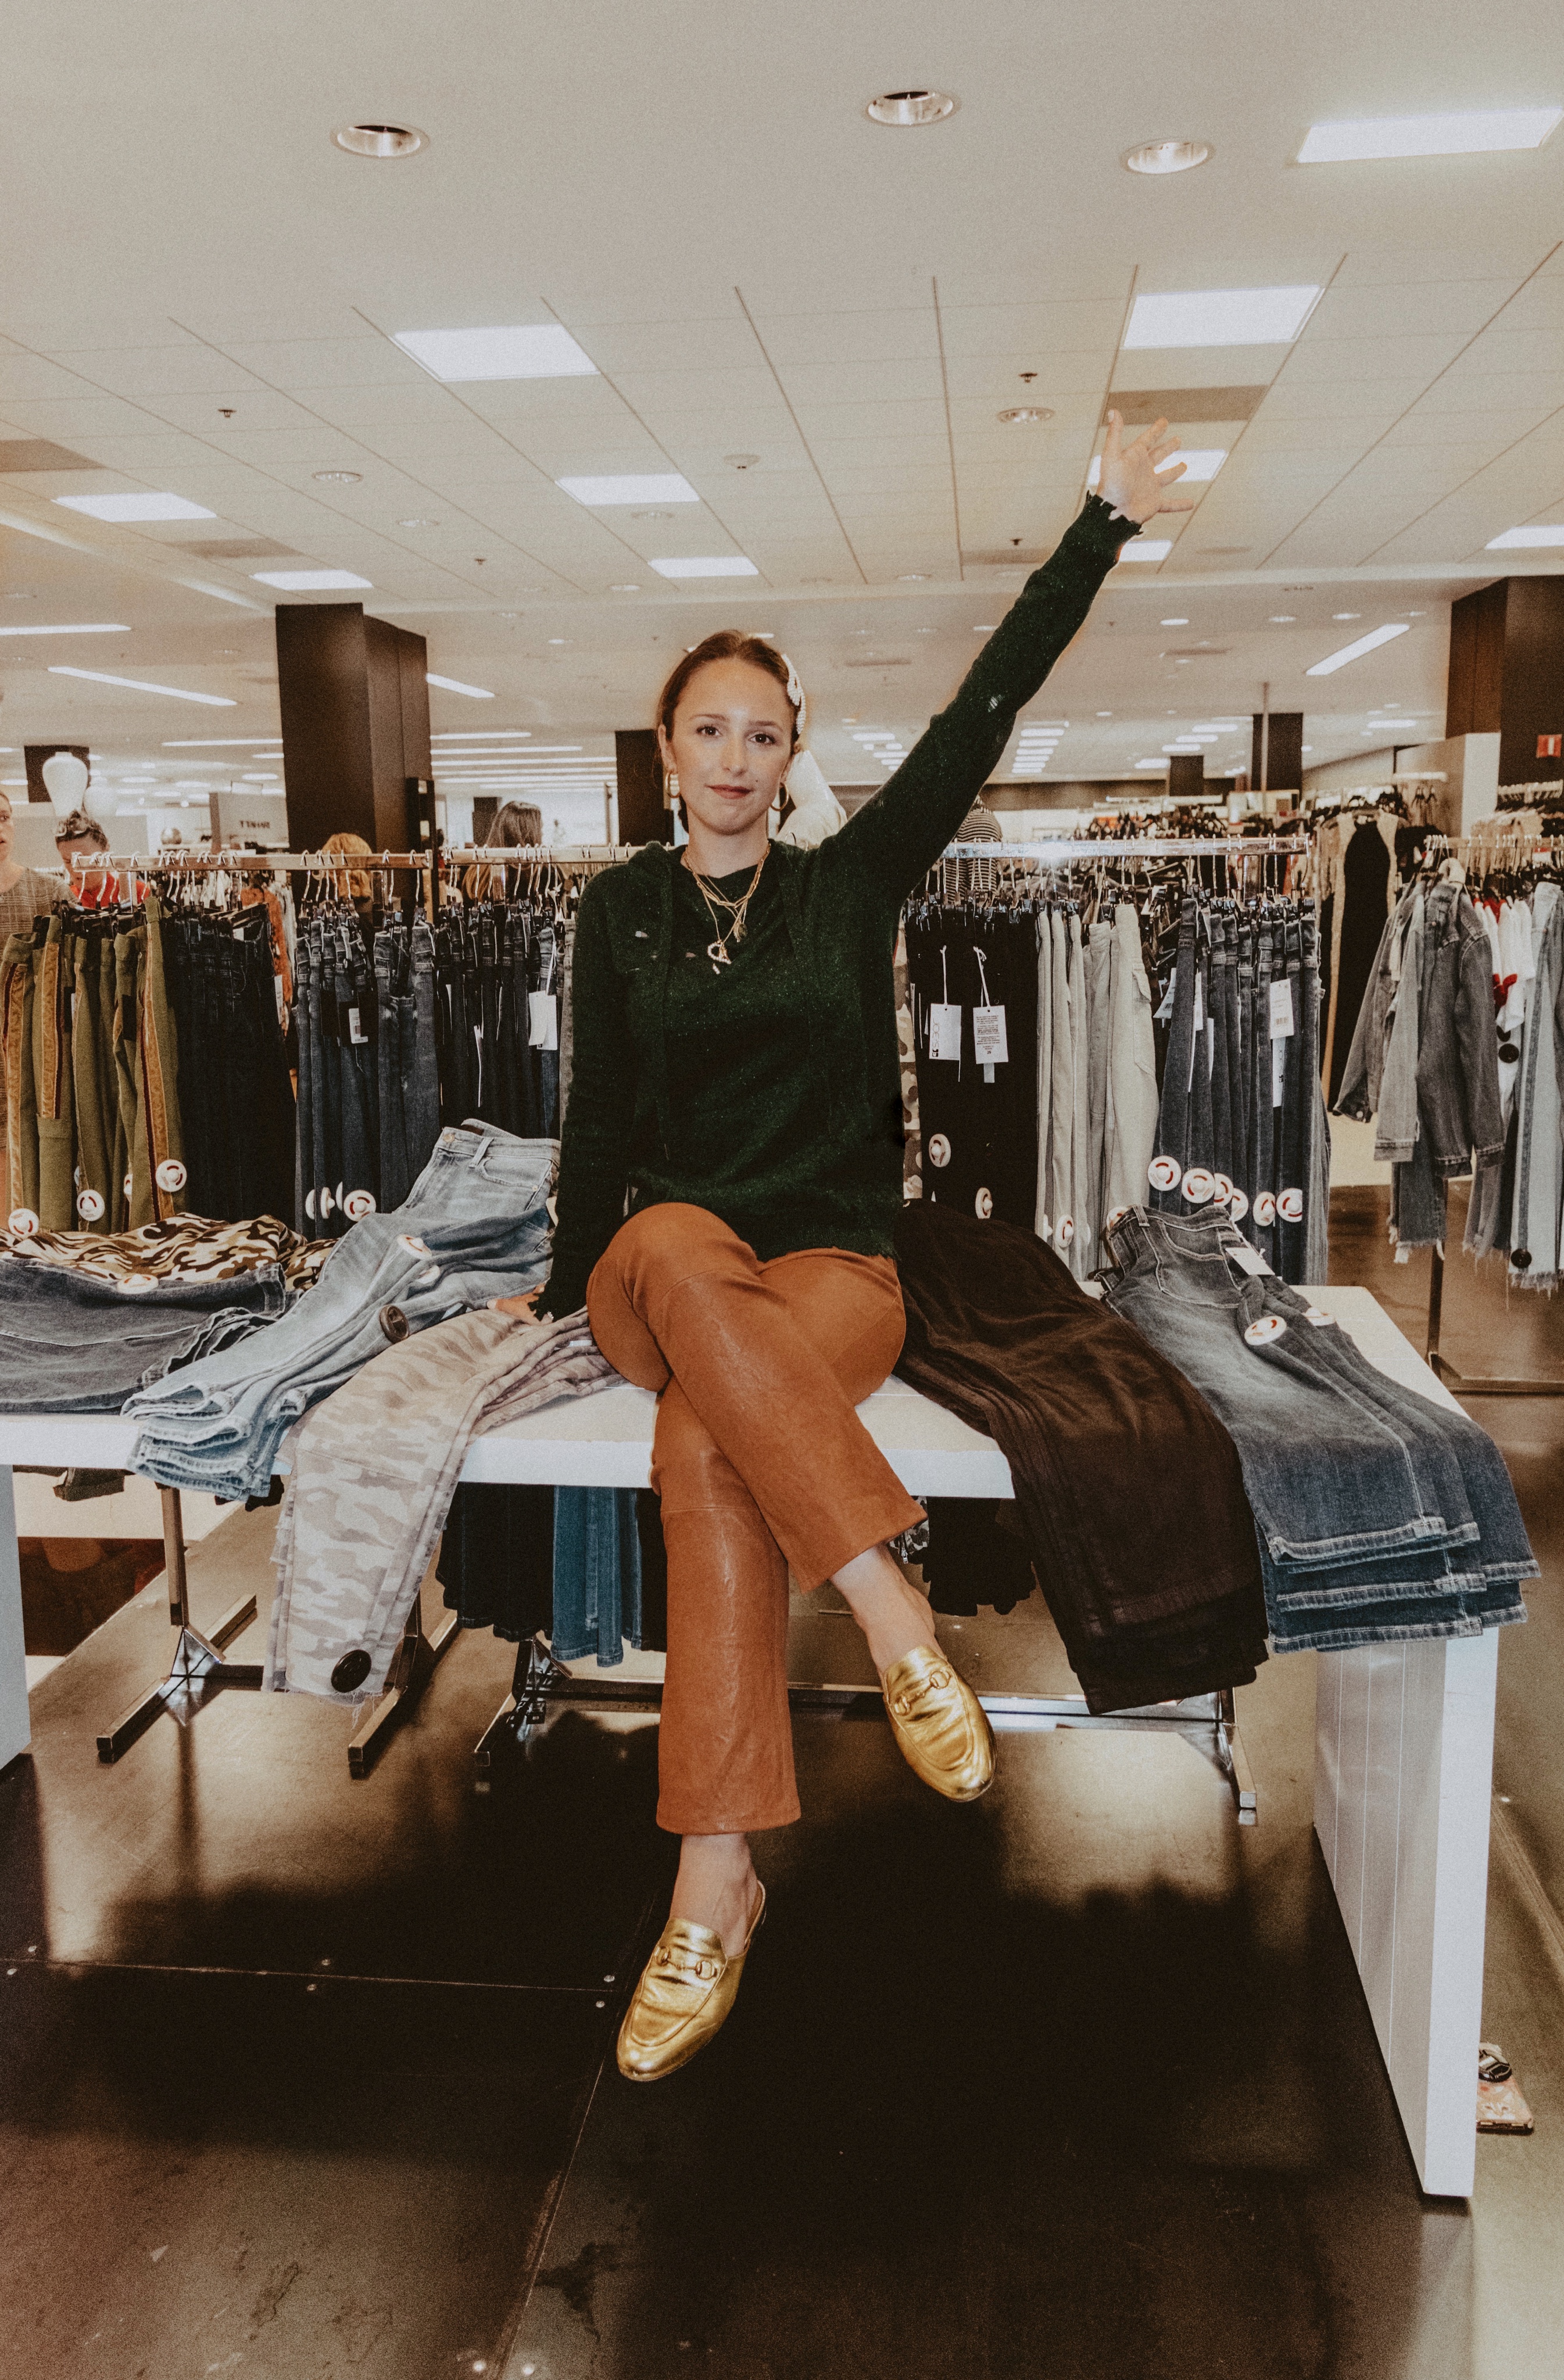 Bloomingdale's White Plains Denim Days Sale - Why To Shop In-Store #bloomigndales #fall #fallfashion #fallstyle #falloutfit #denin #jeans #designersale #designerdenim #frame #fashion #outfit #style #shopping #sale